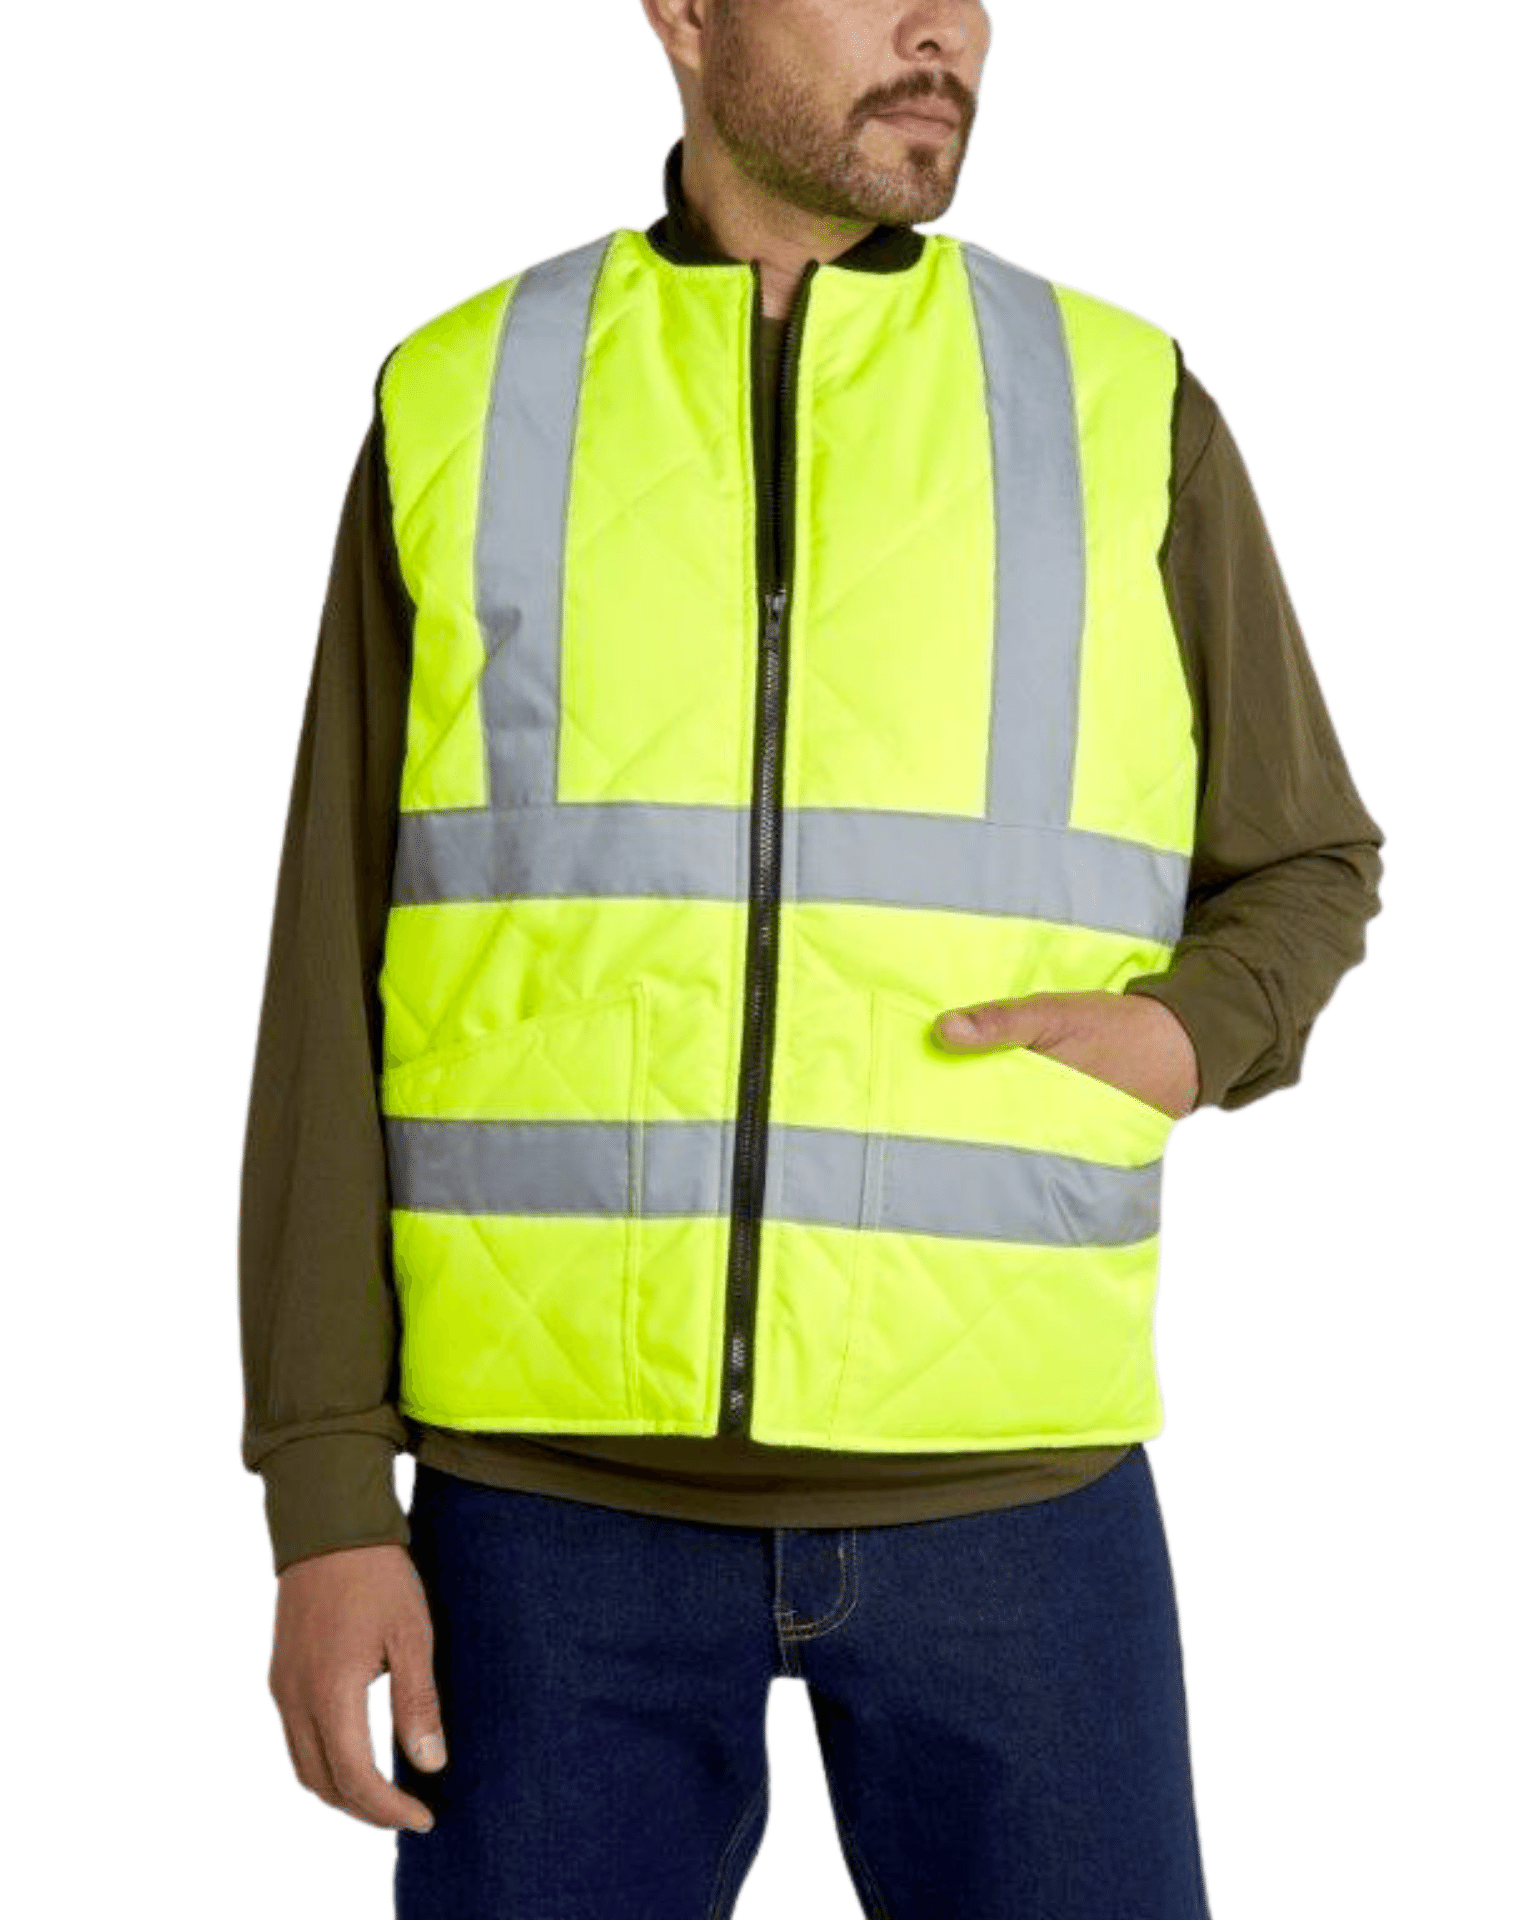 UHV919 WarmUP Insulated Safety Vest - Utility Pro Wear